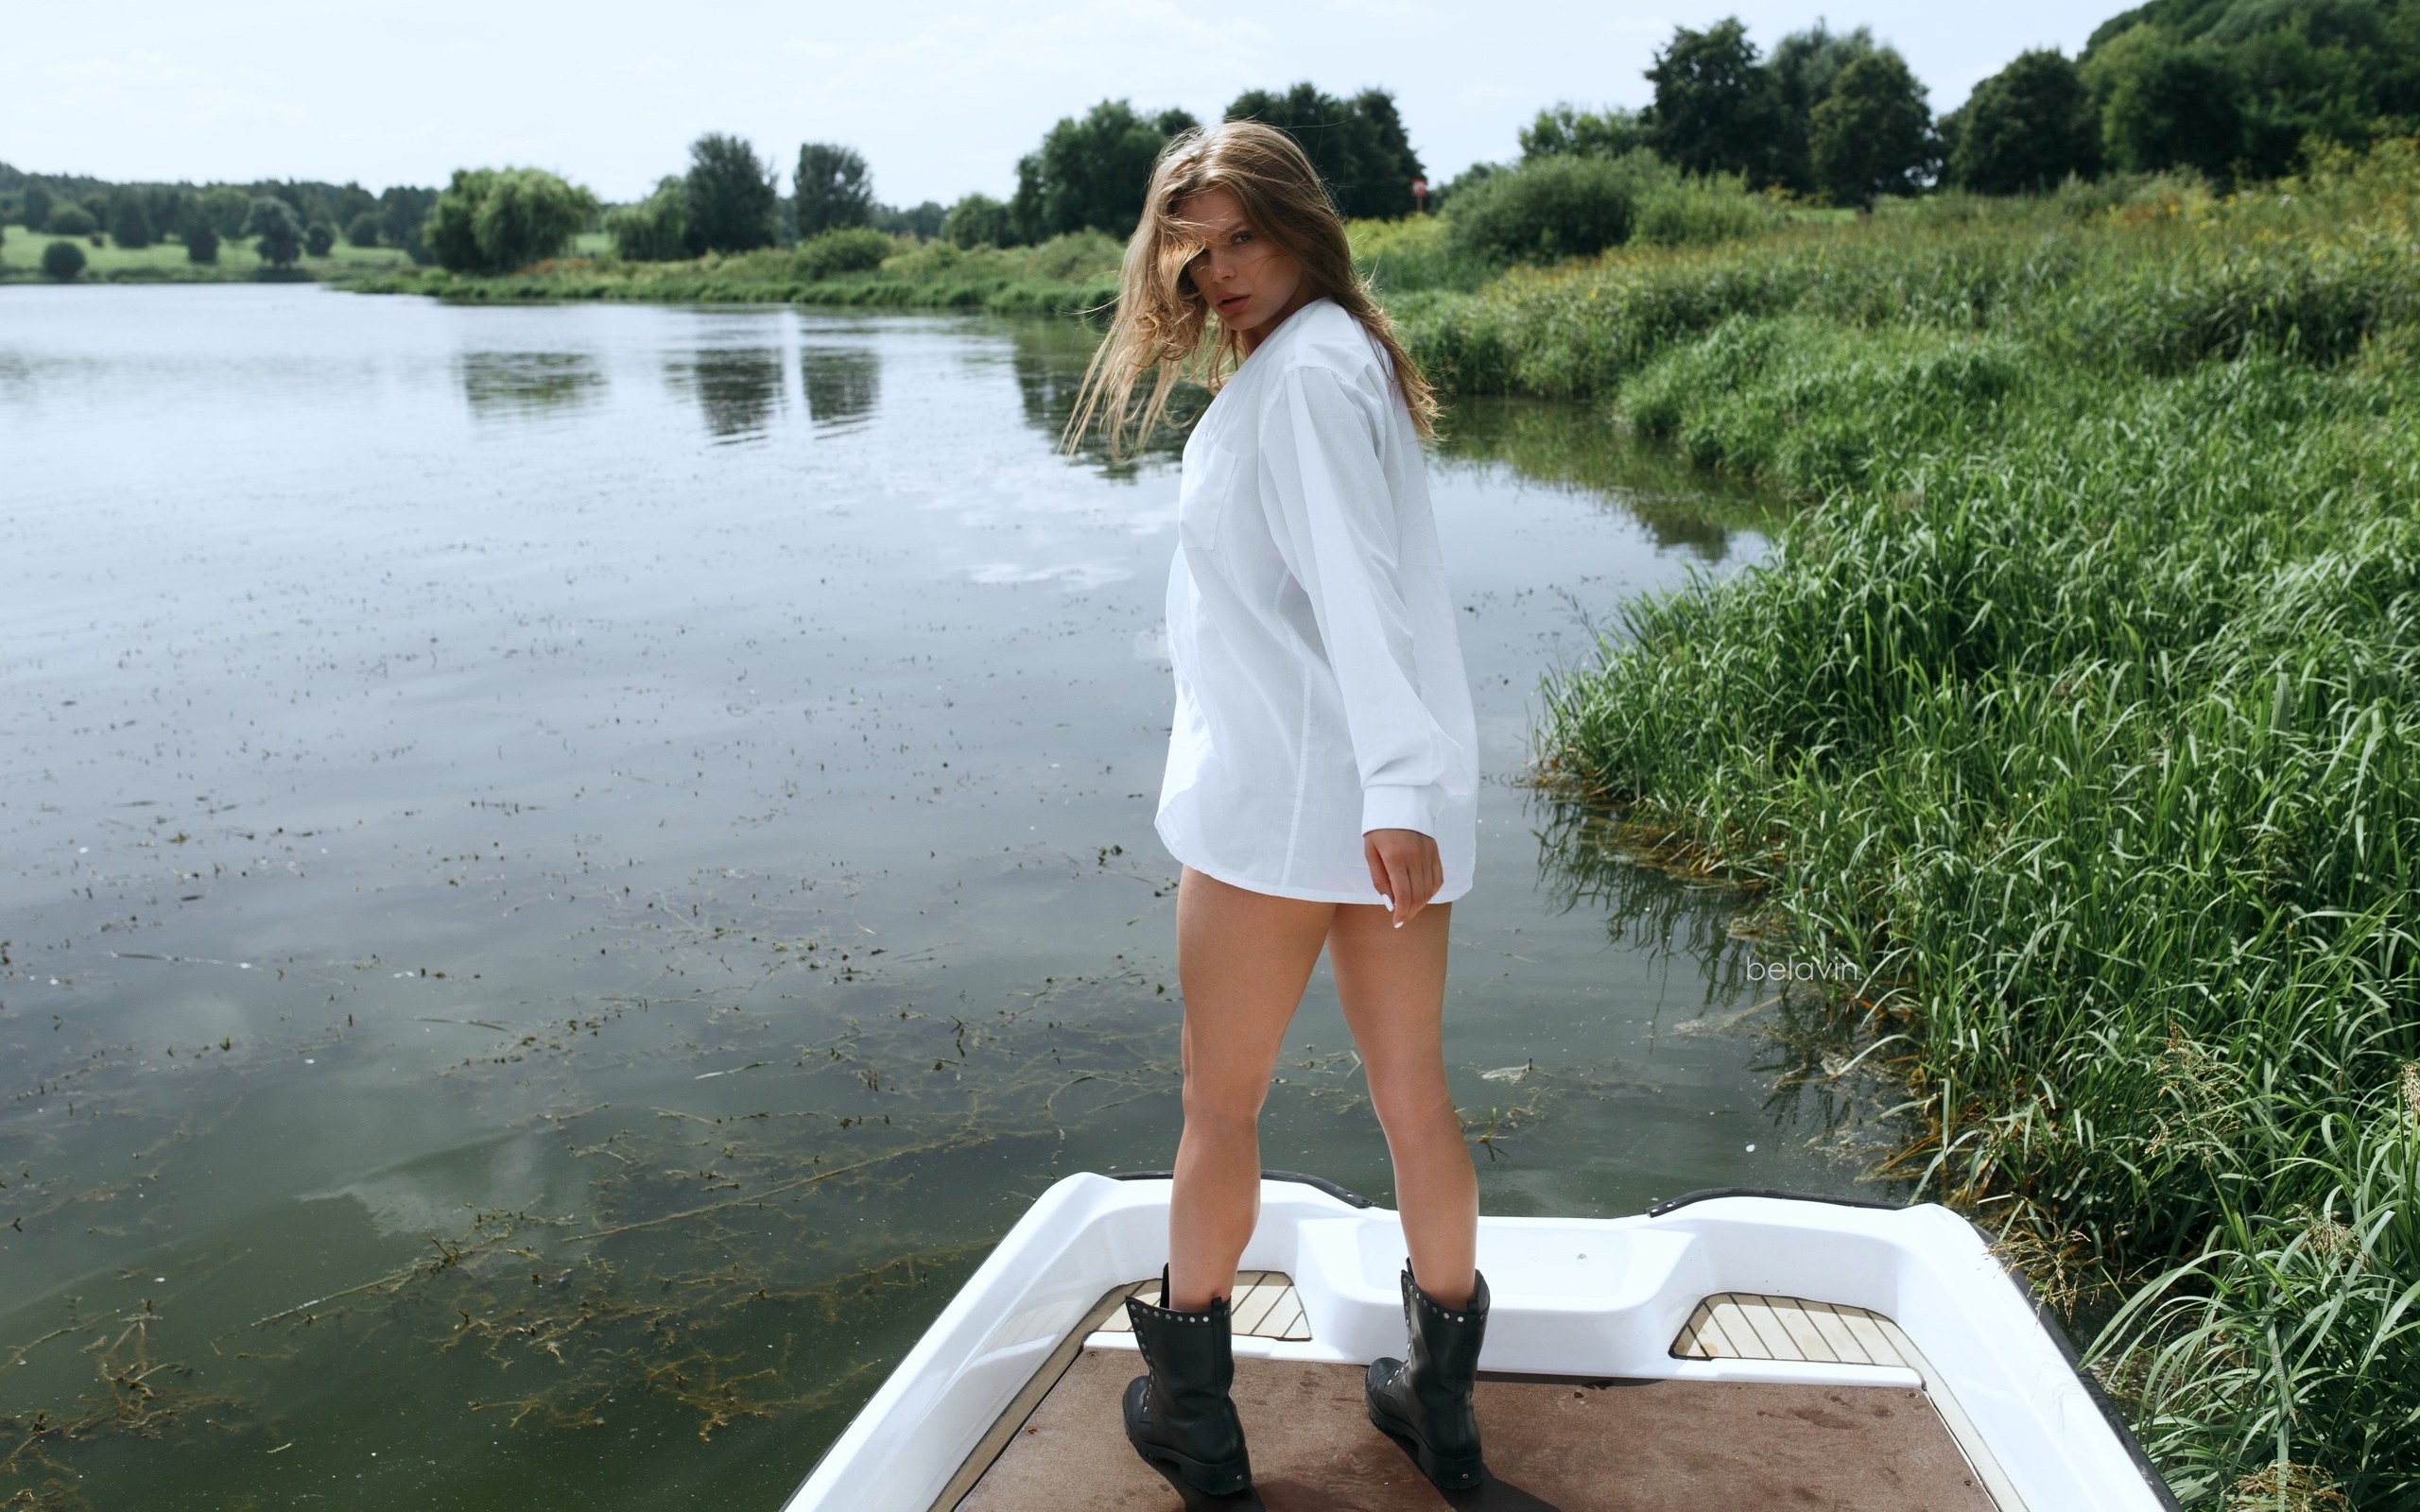 women, alexander belavin, shoes, water, boat, women outdoors, white shirt, brunette, looking at viewer, white nails, hair in face